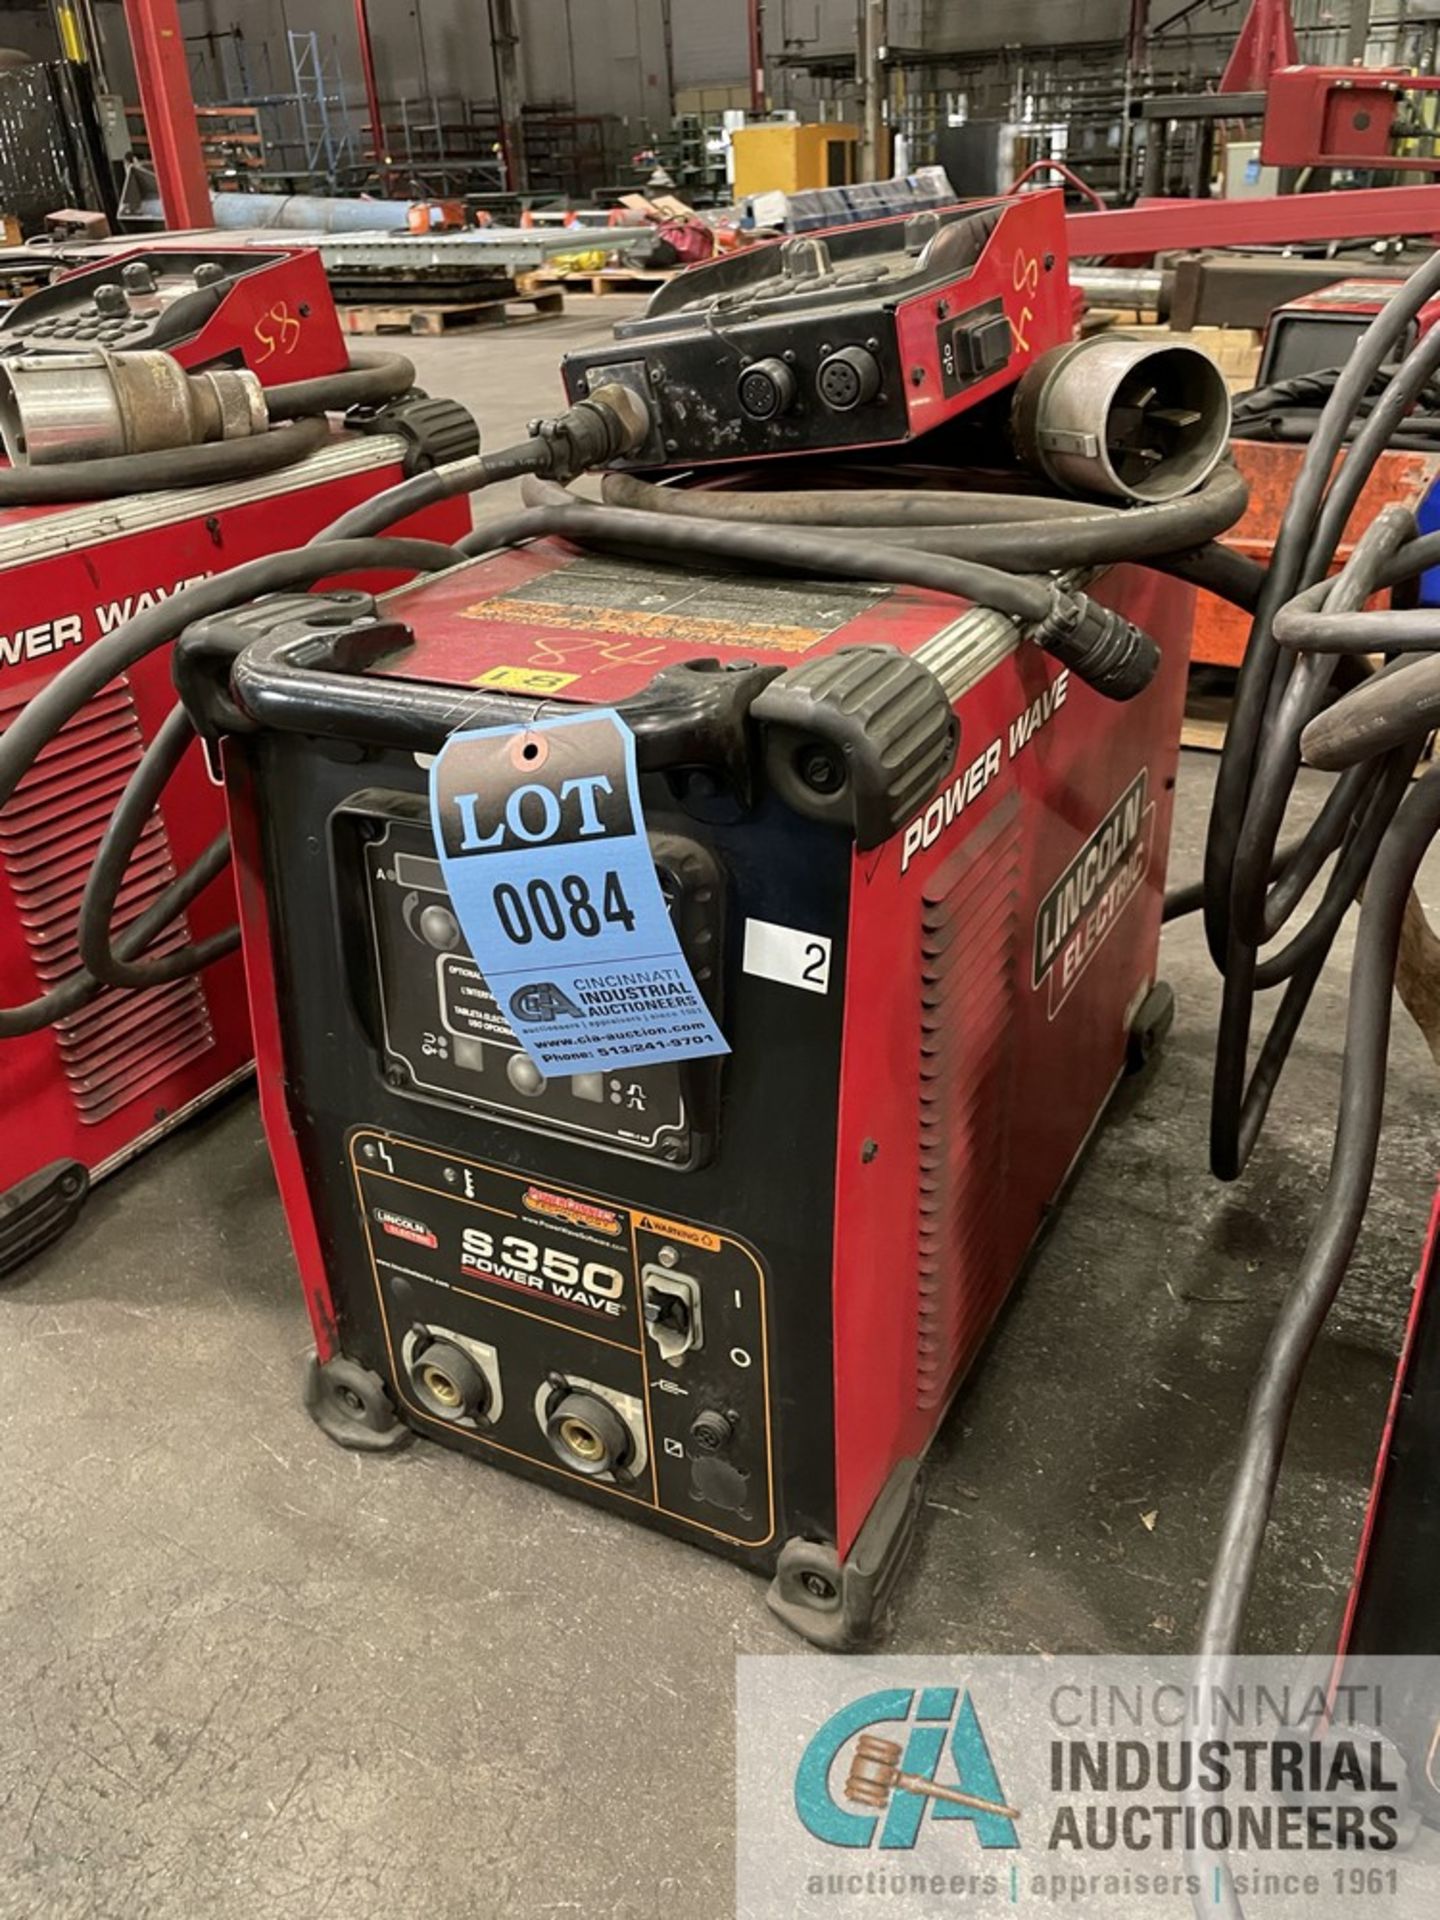 350 AMP LINCOLN S350 POWER WAVE ADVANCED PROCESS WELDER S/N U1130706851, WITH POWER FEED